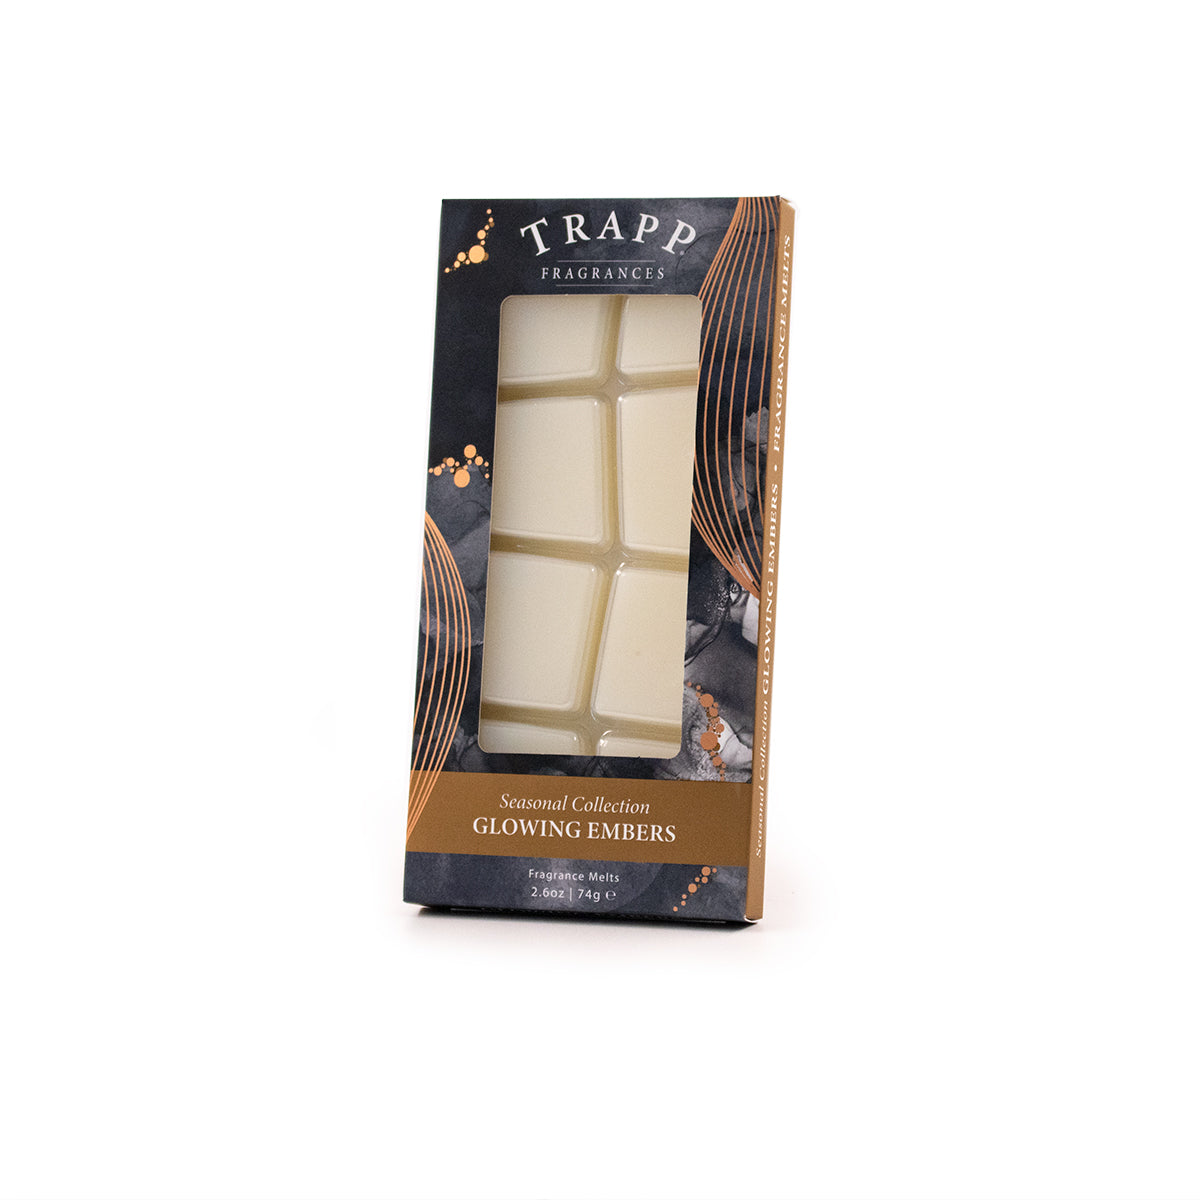 Trapp Glowing Embers Fragrance Melt